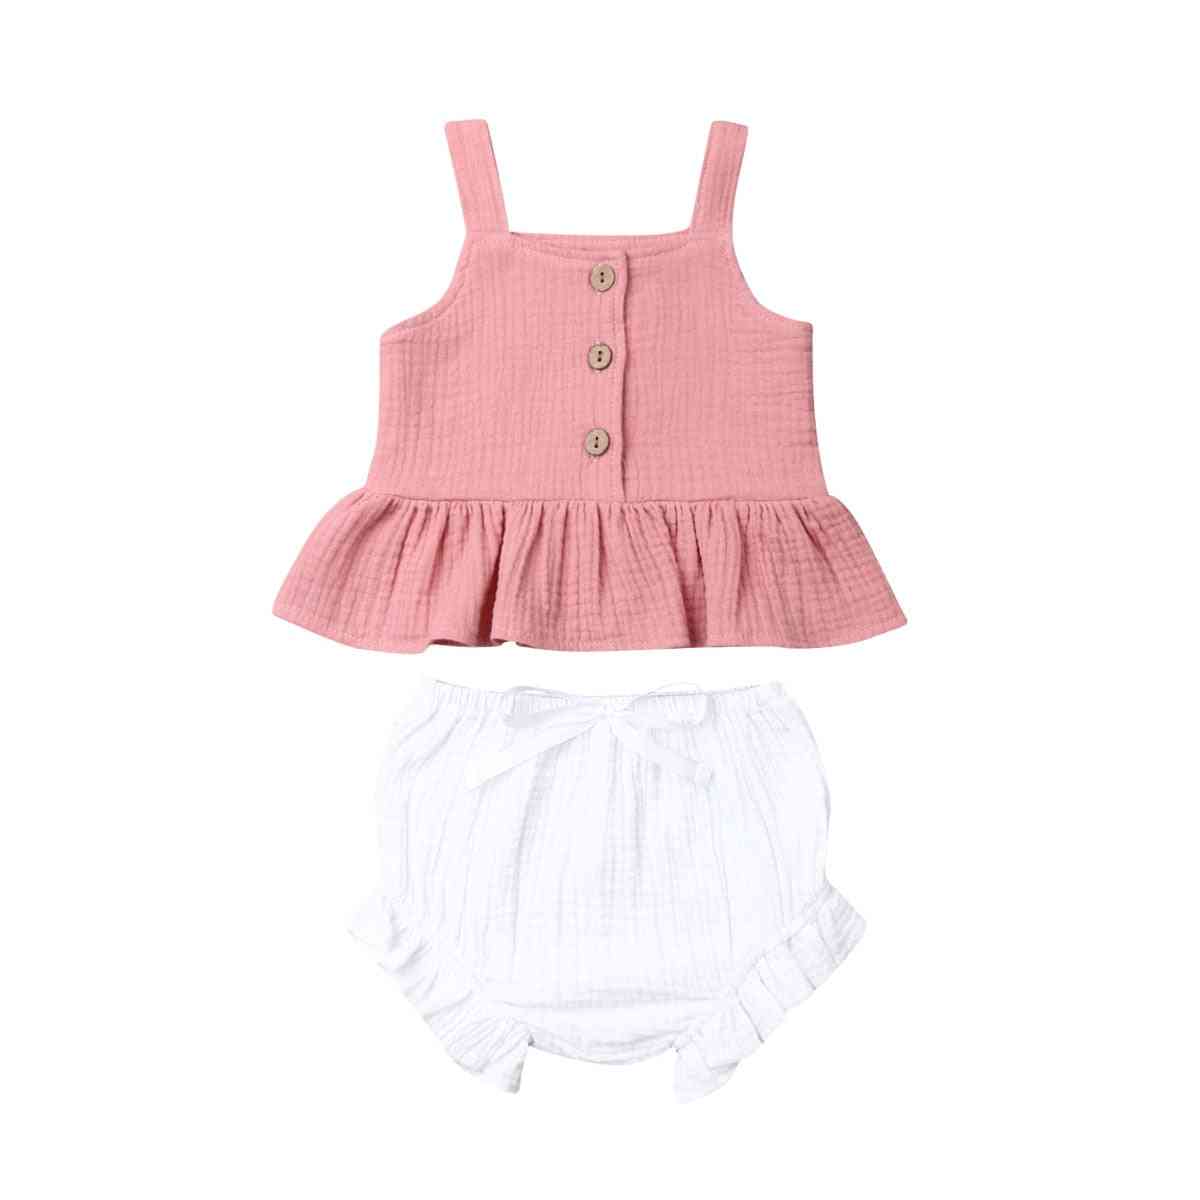 Button Sleeveless Mini Shorts Outfits For Newborn Baby